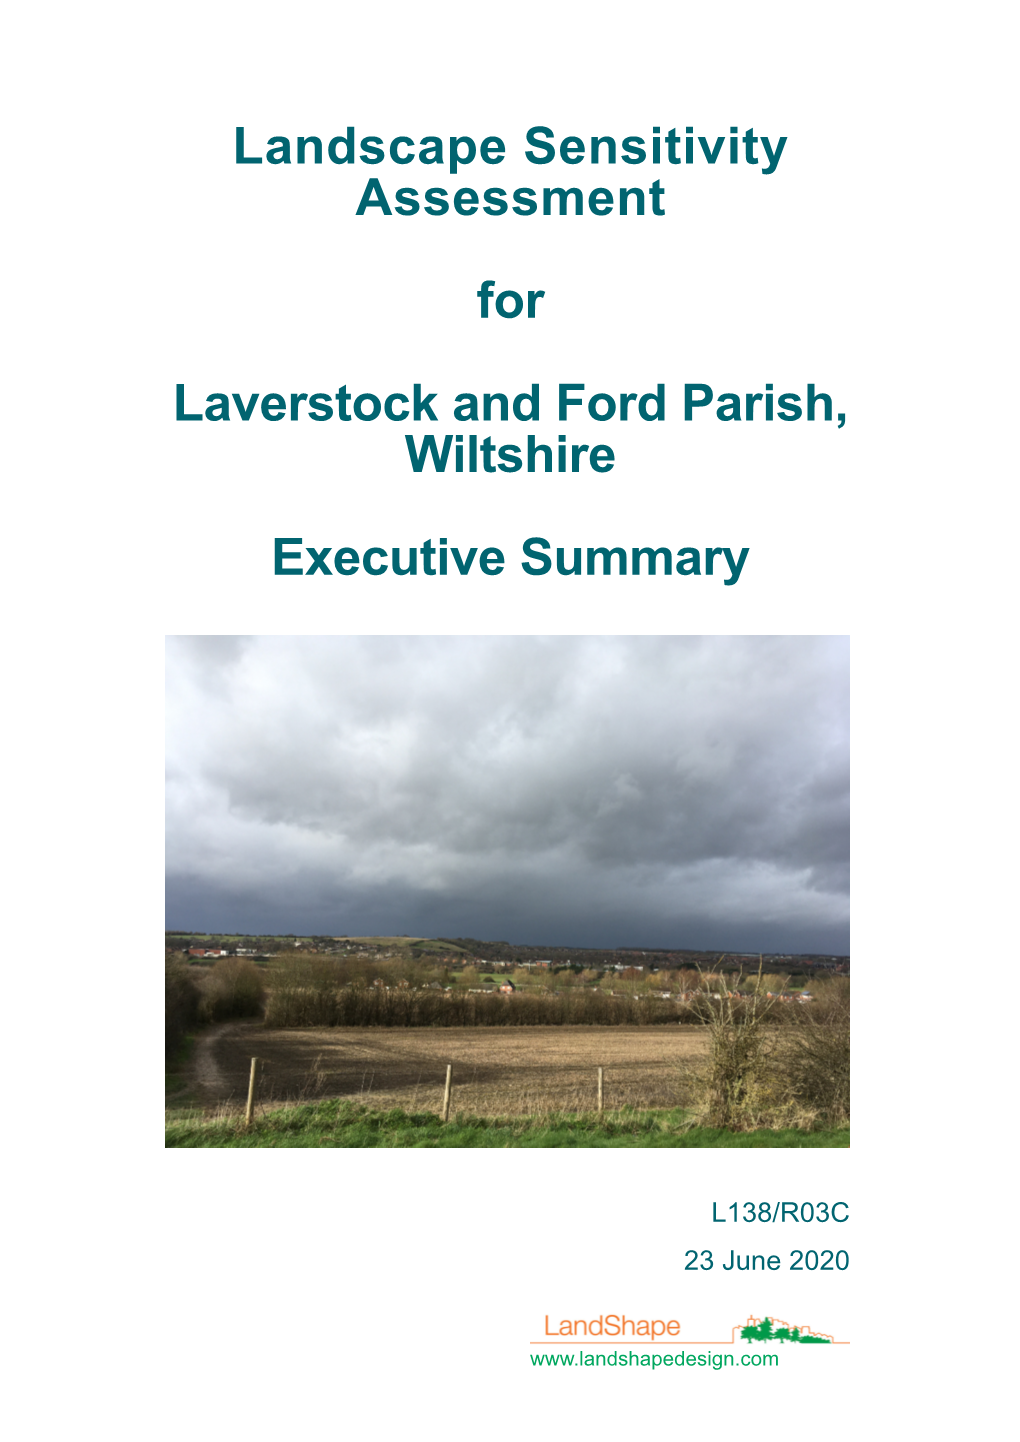 Landscape Sensitivity Assessment for Laverstock and Ford Parish, Wiltshire Executive Summary